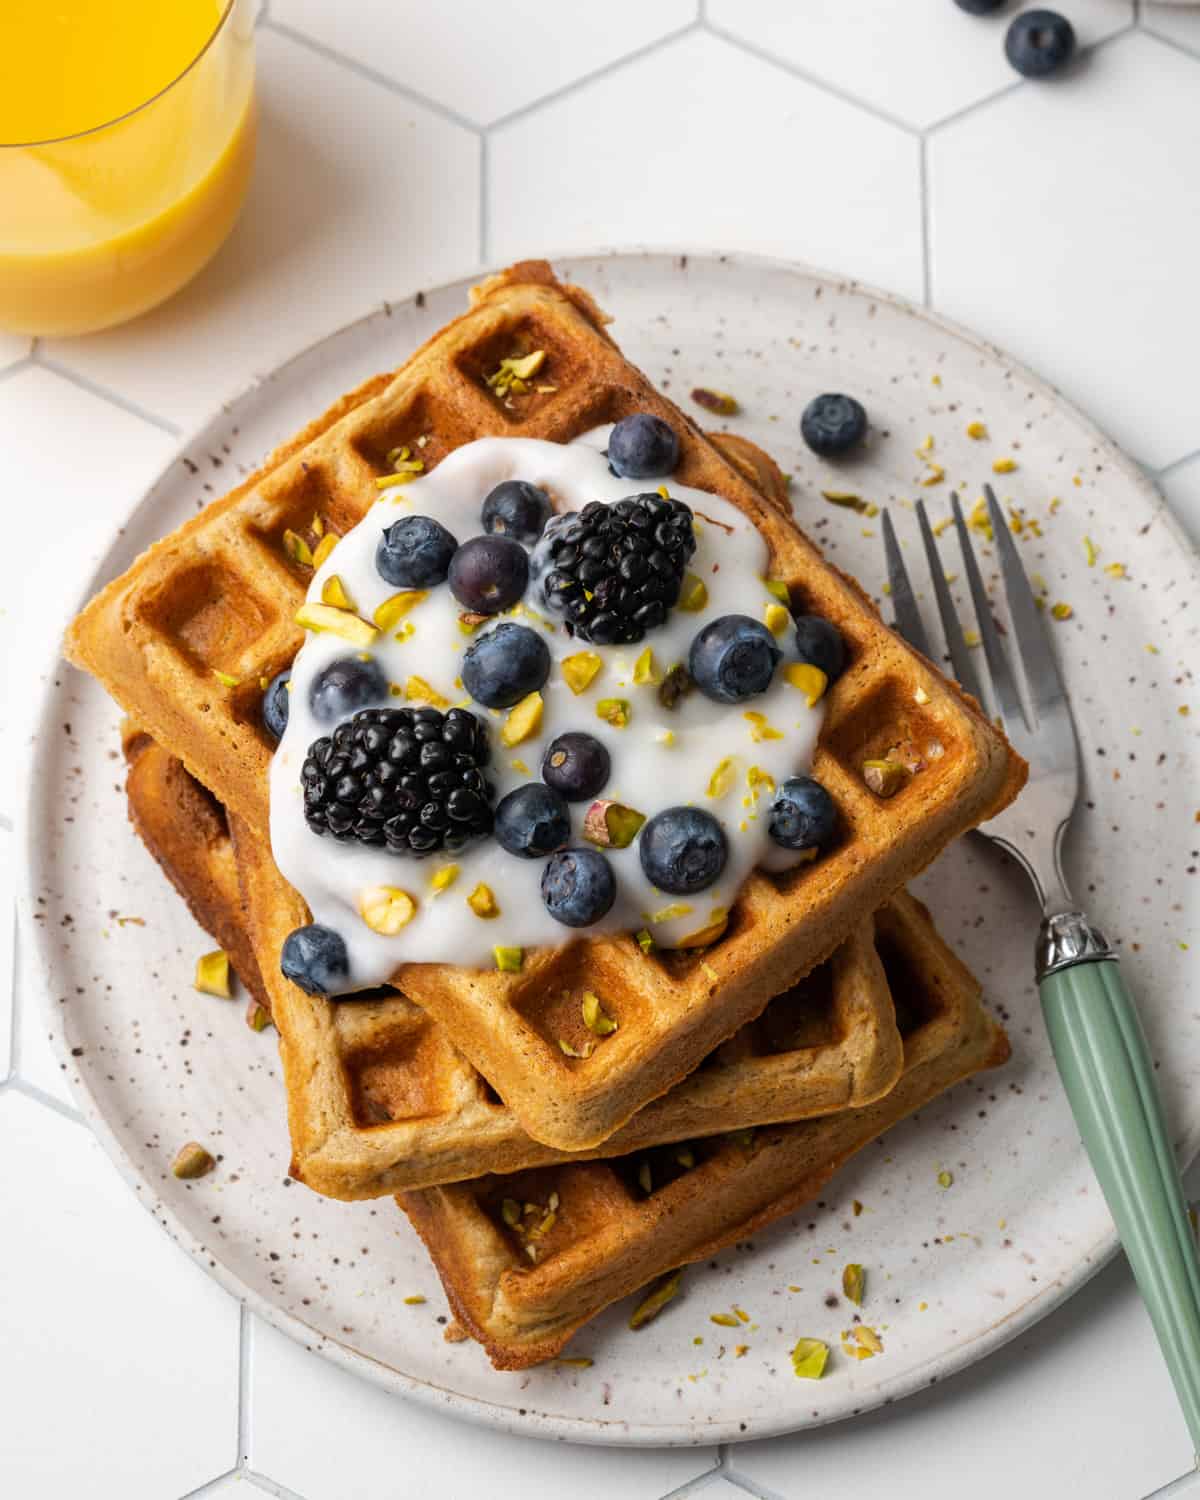 A stack of three golden oat flour waffles topped with dairy free yogurt, blueberries, blackberries and chopped pistachios.